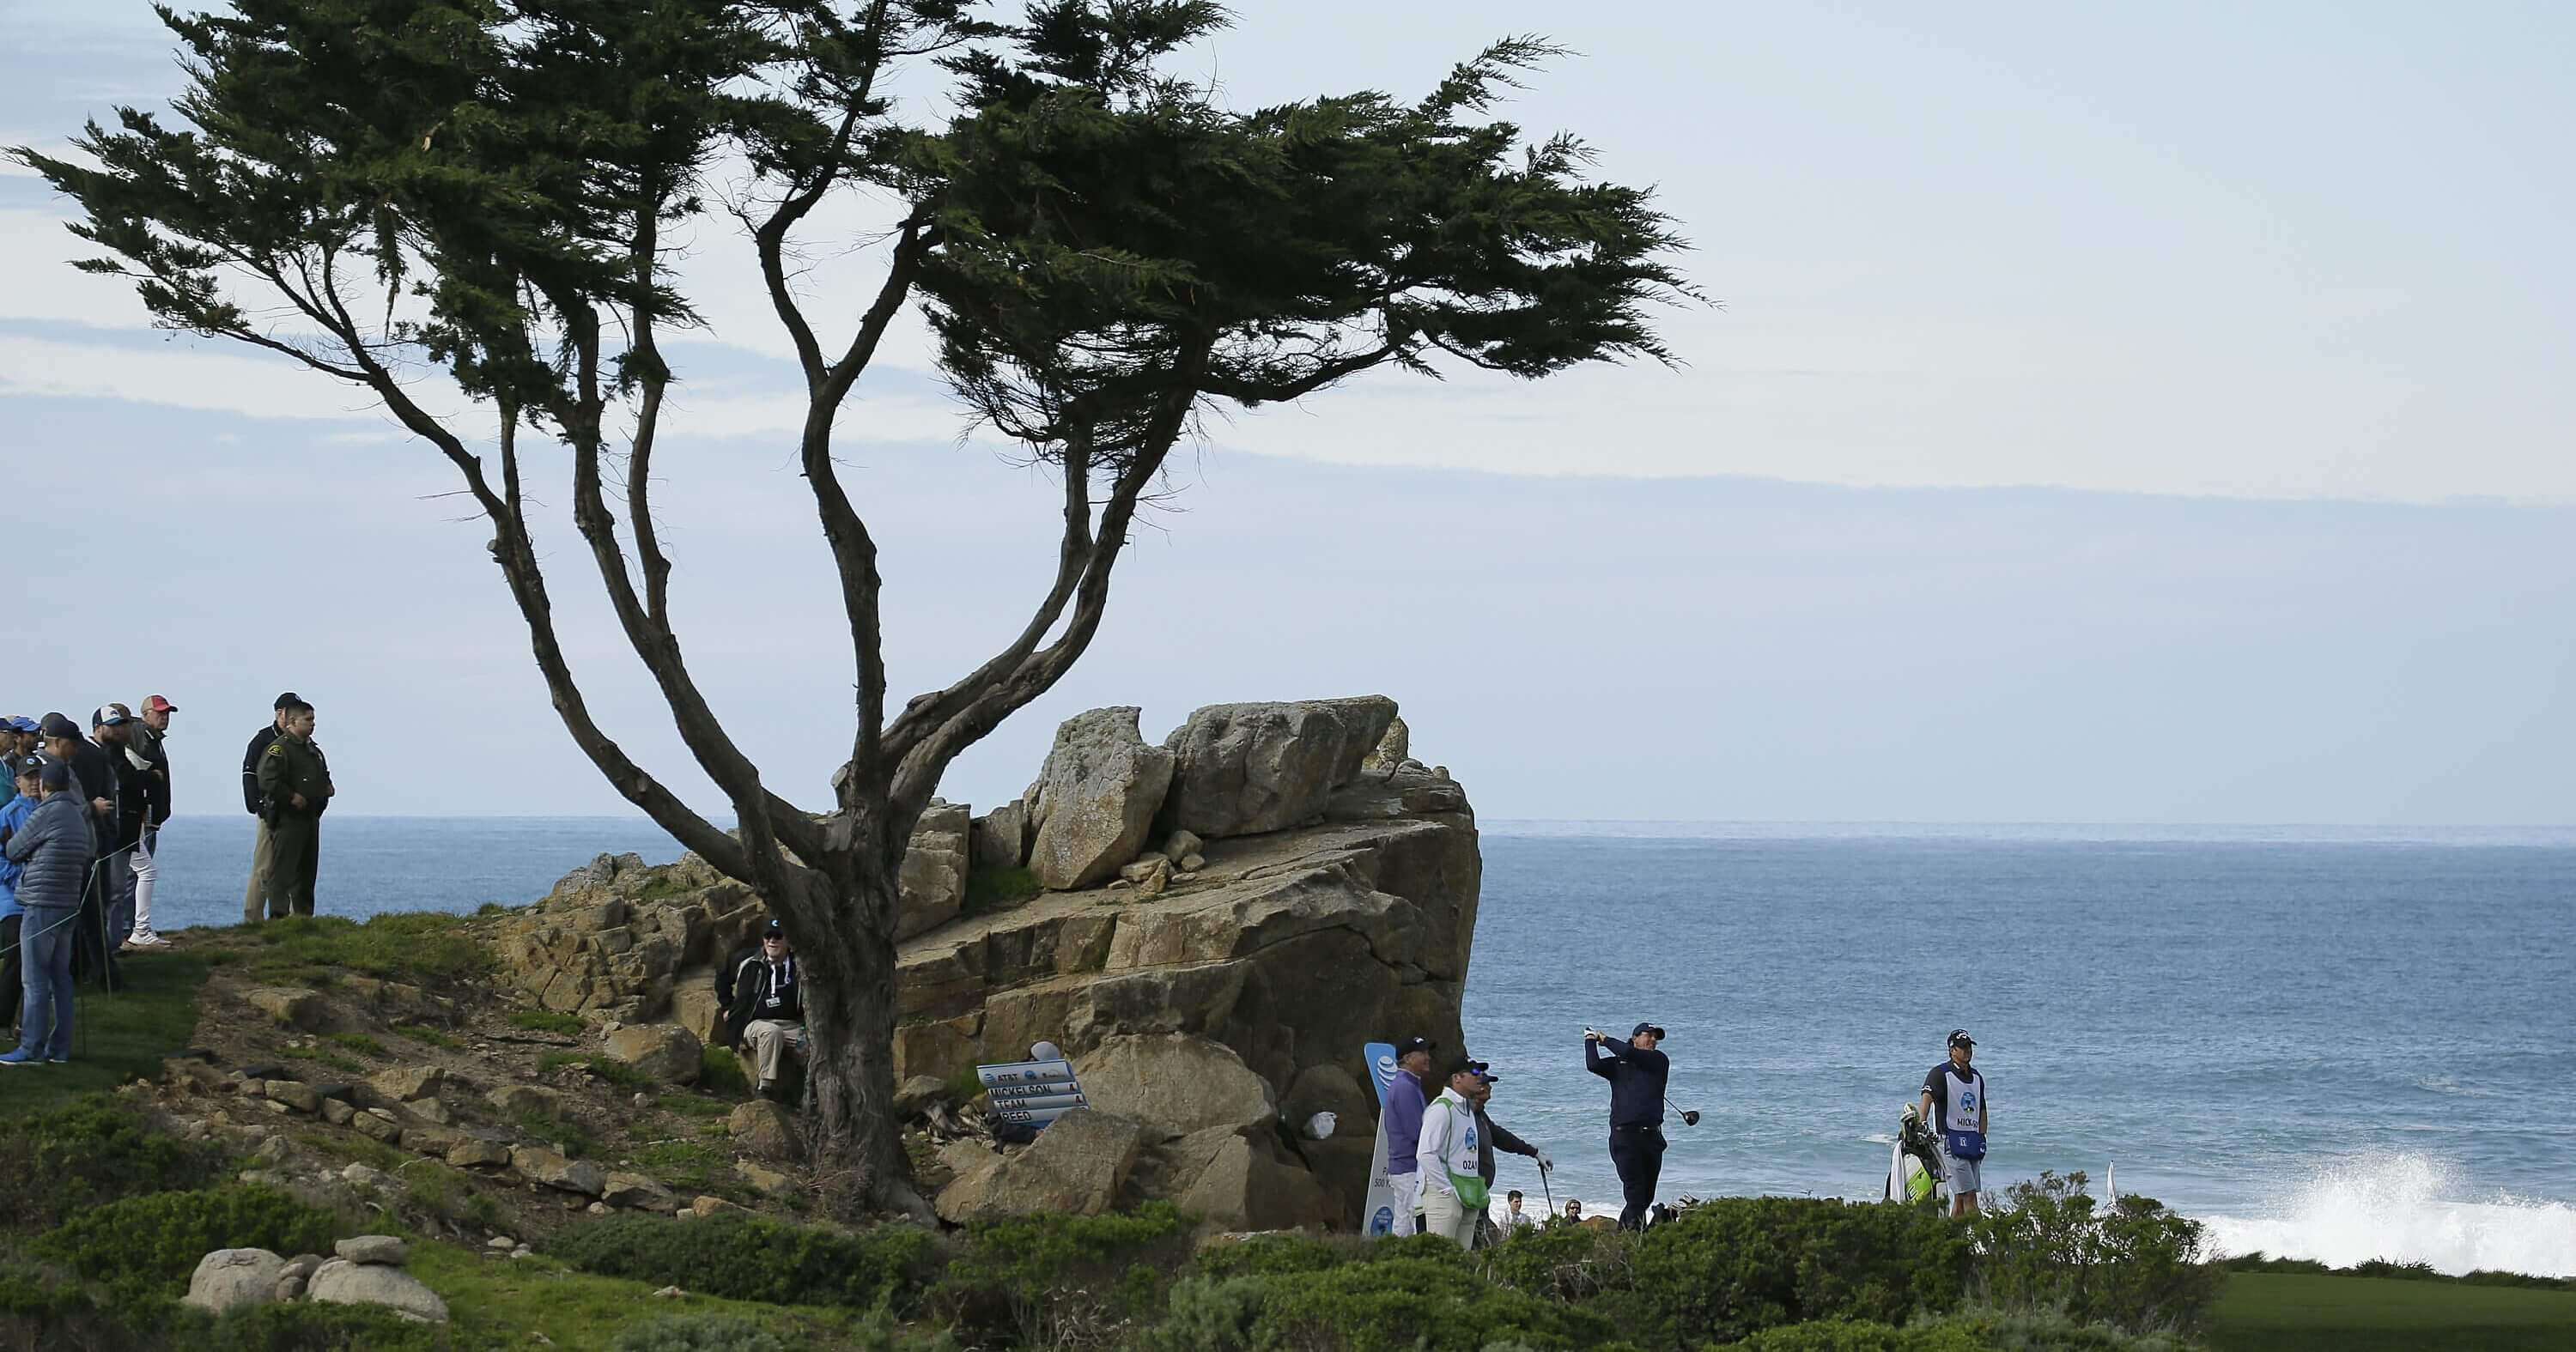 Phil Mickelson follows his drive from the 16th tee of the Monterey Peninsula Country Club Shore Course during the first round of the AT&T Pebble Beach National Pro-Am golf tournament Thursday.